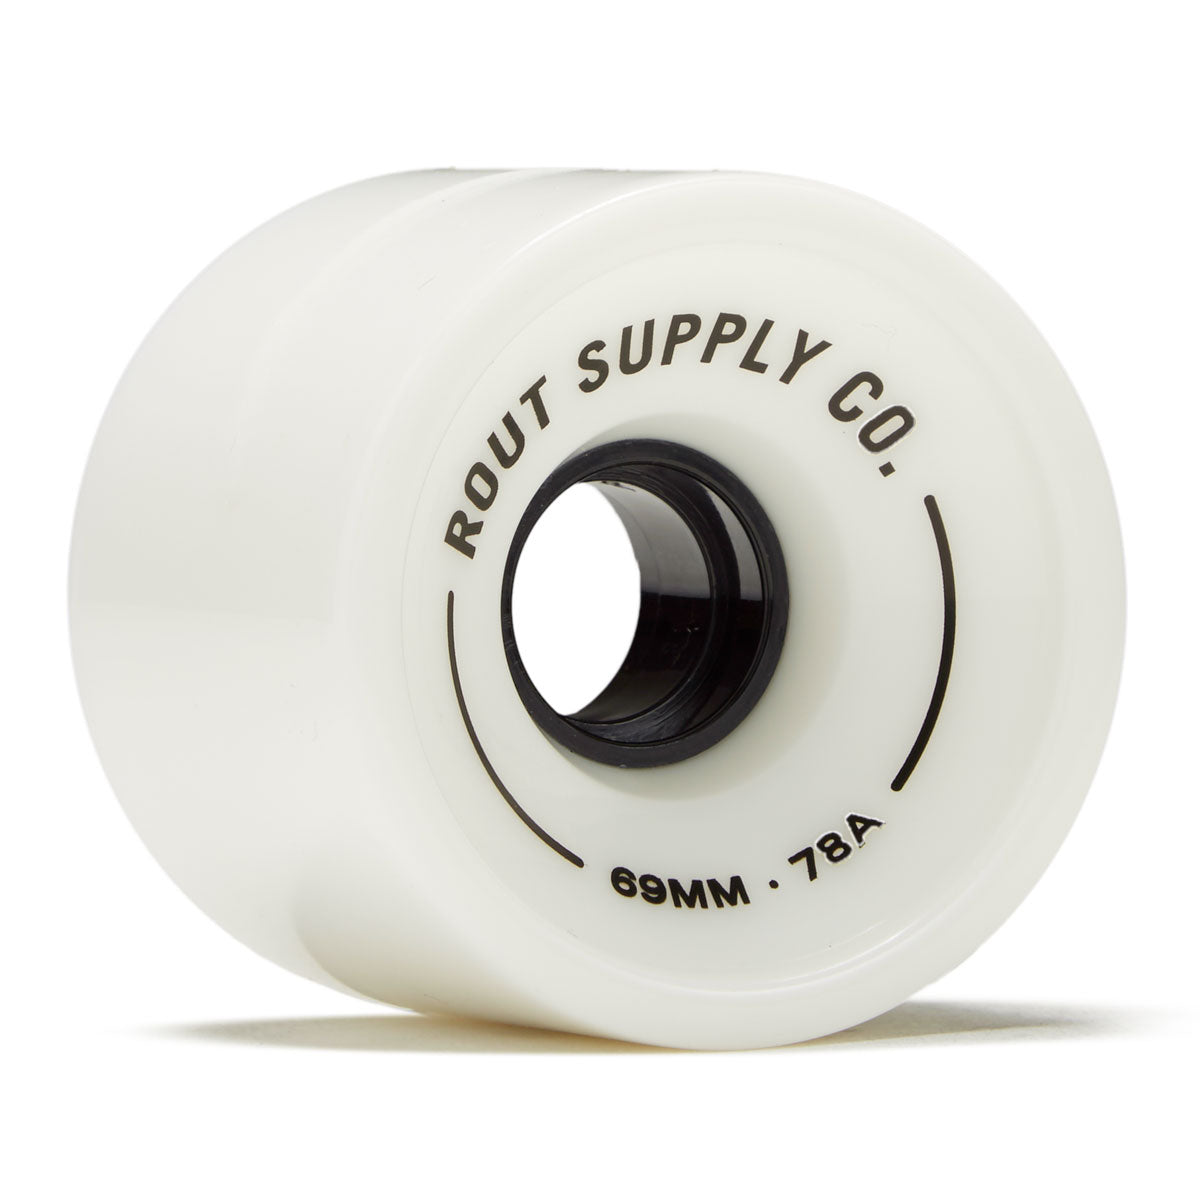 Rout Longboard Wheels - 69mm 78a - White image 1